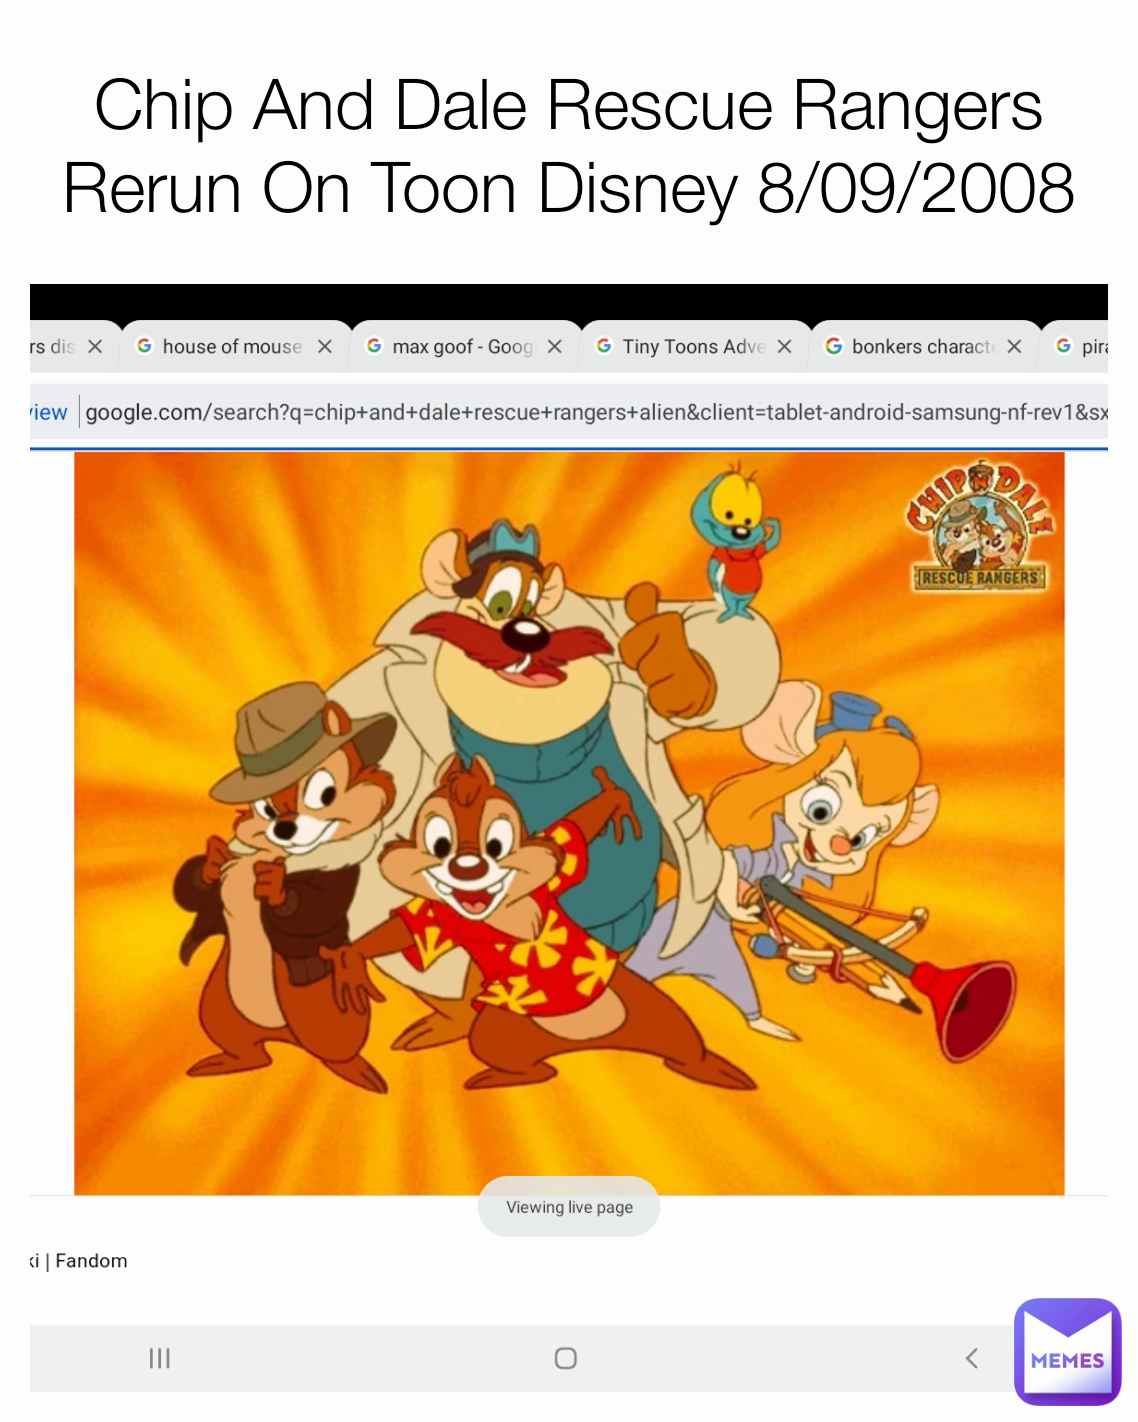 Chip And Dale Rescue Rangers Rerun On Toon Disney 8/09/2008